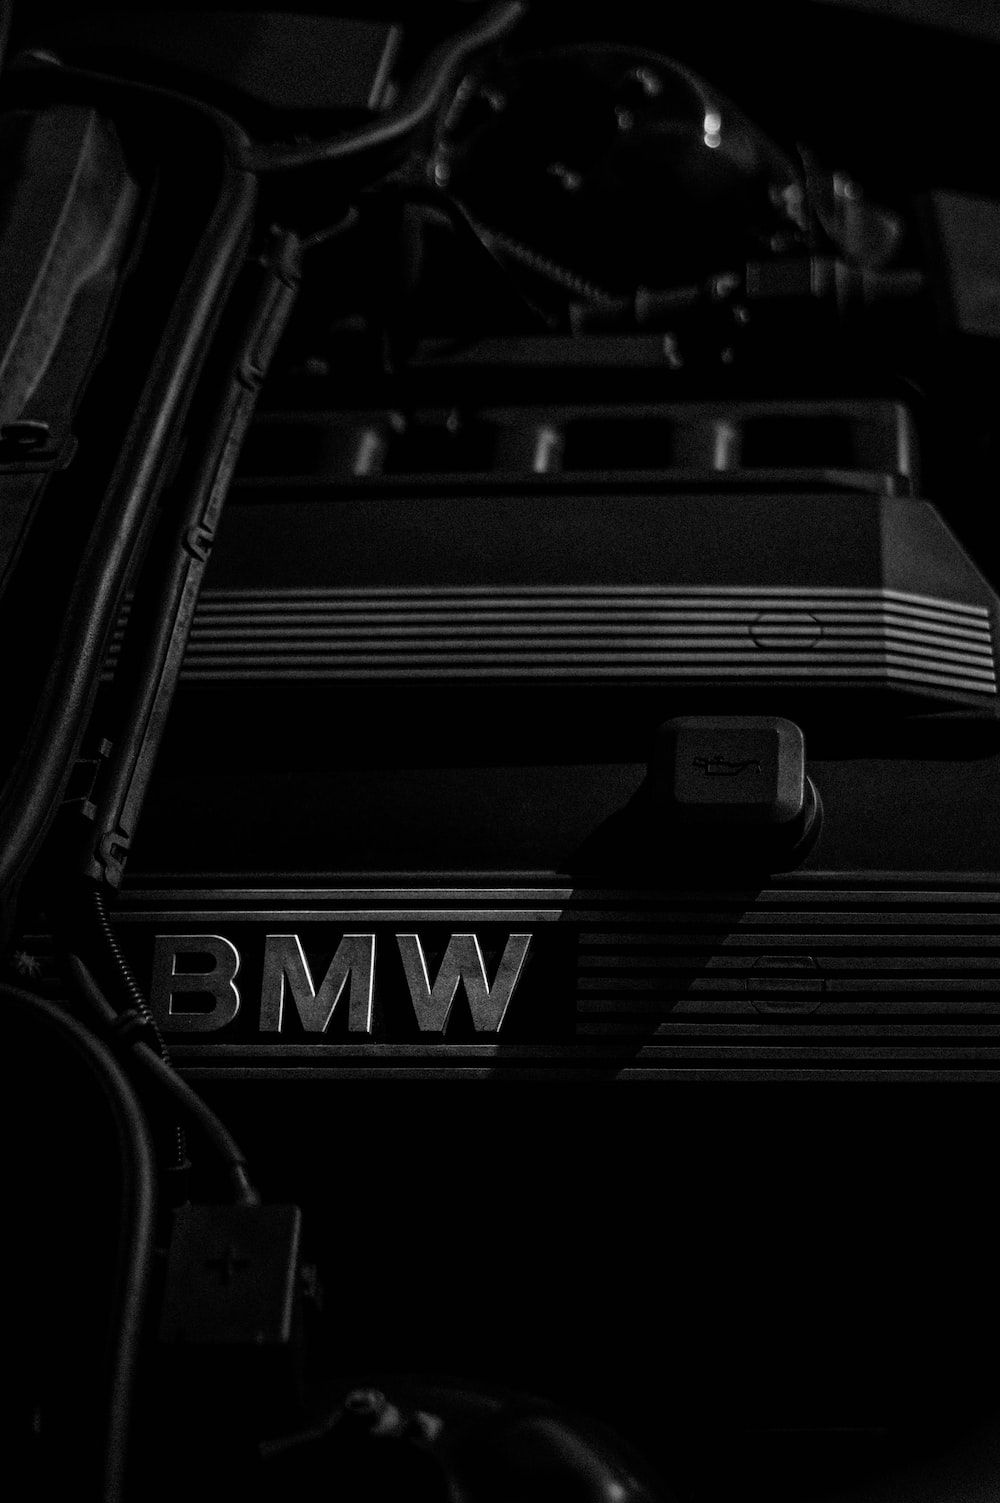 Bmw Wallpaper Picture. Download Free Image